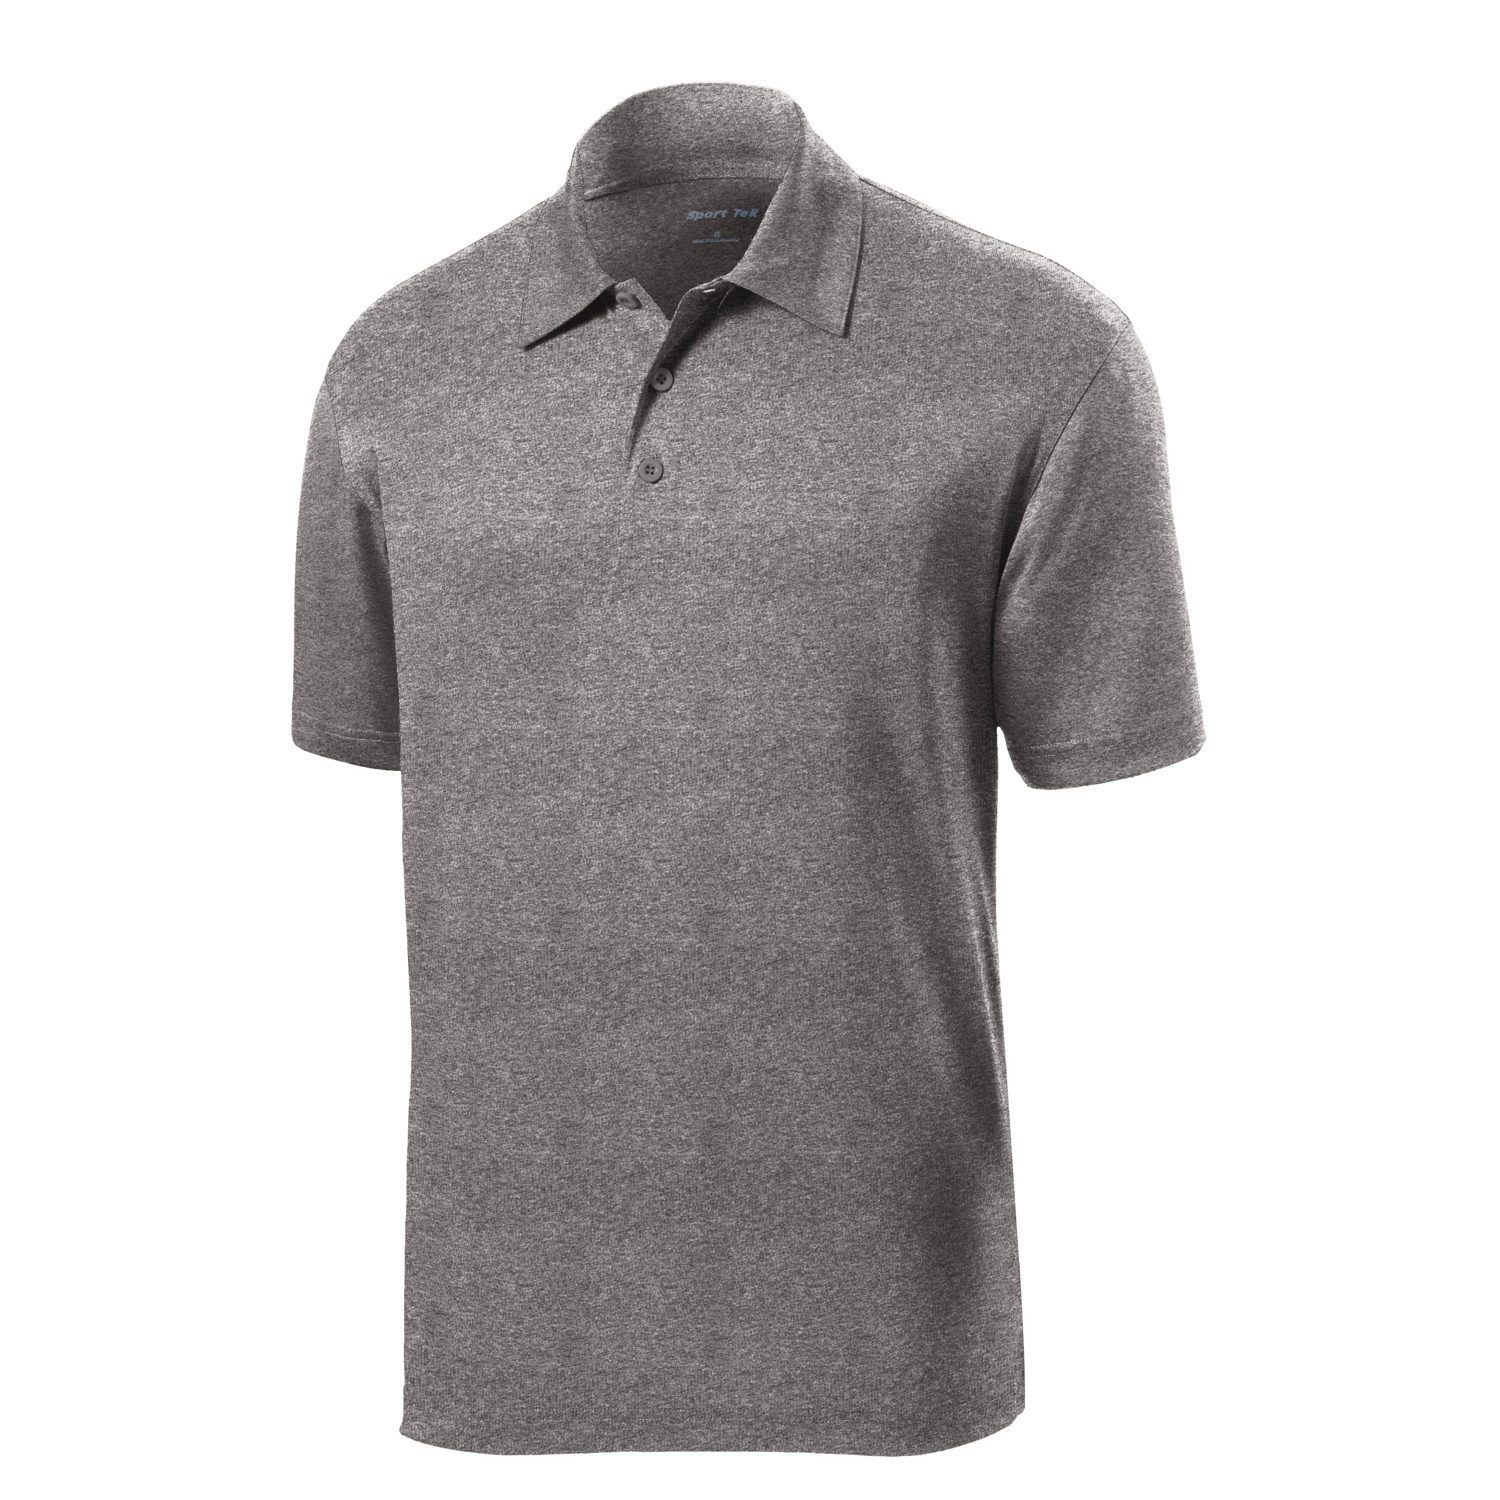 Heathered Performance Polo: Color Options | Hands On Originals